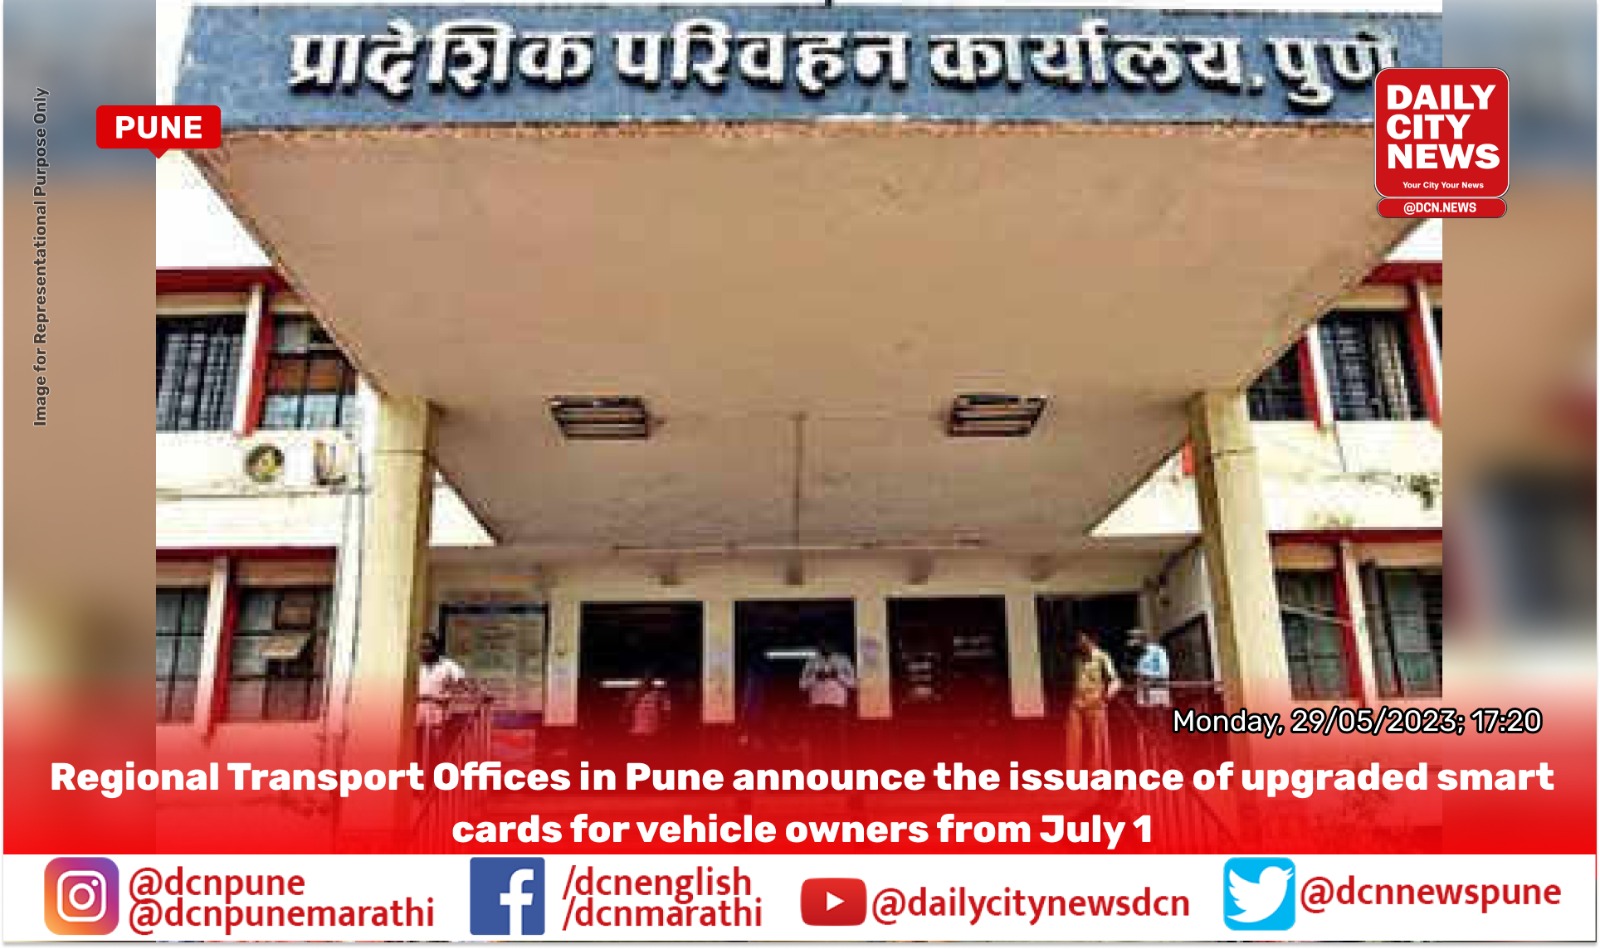 Regional Transport Offices in Pune announce the issuance of upgraded smart cards for vehicle owners from July 1